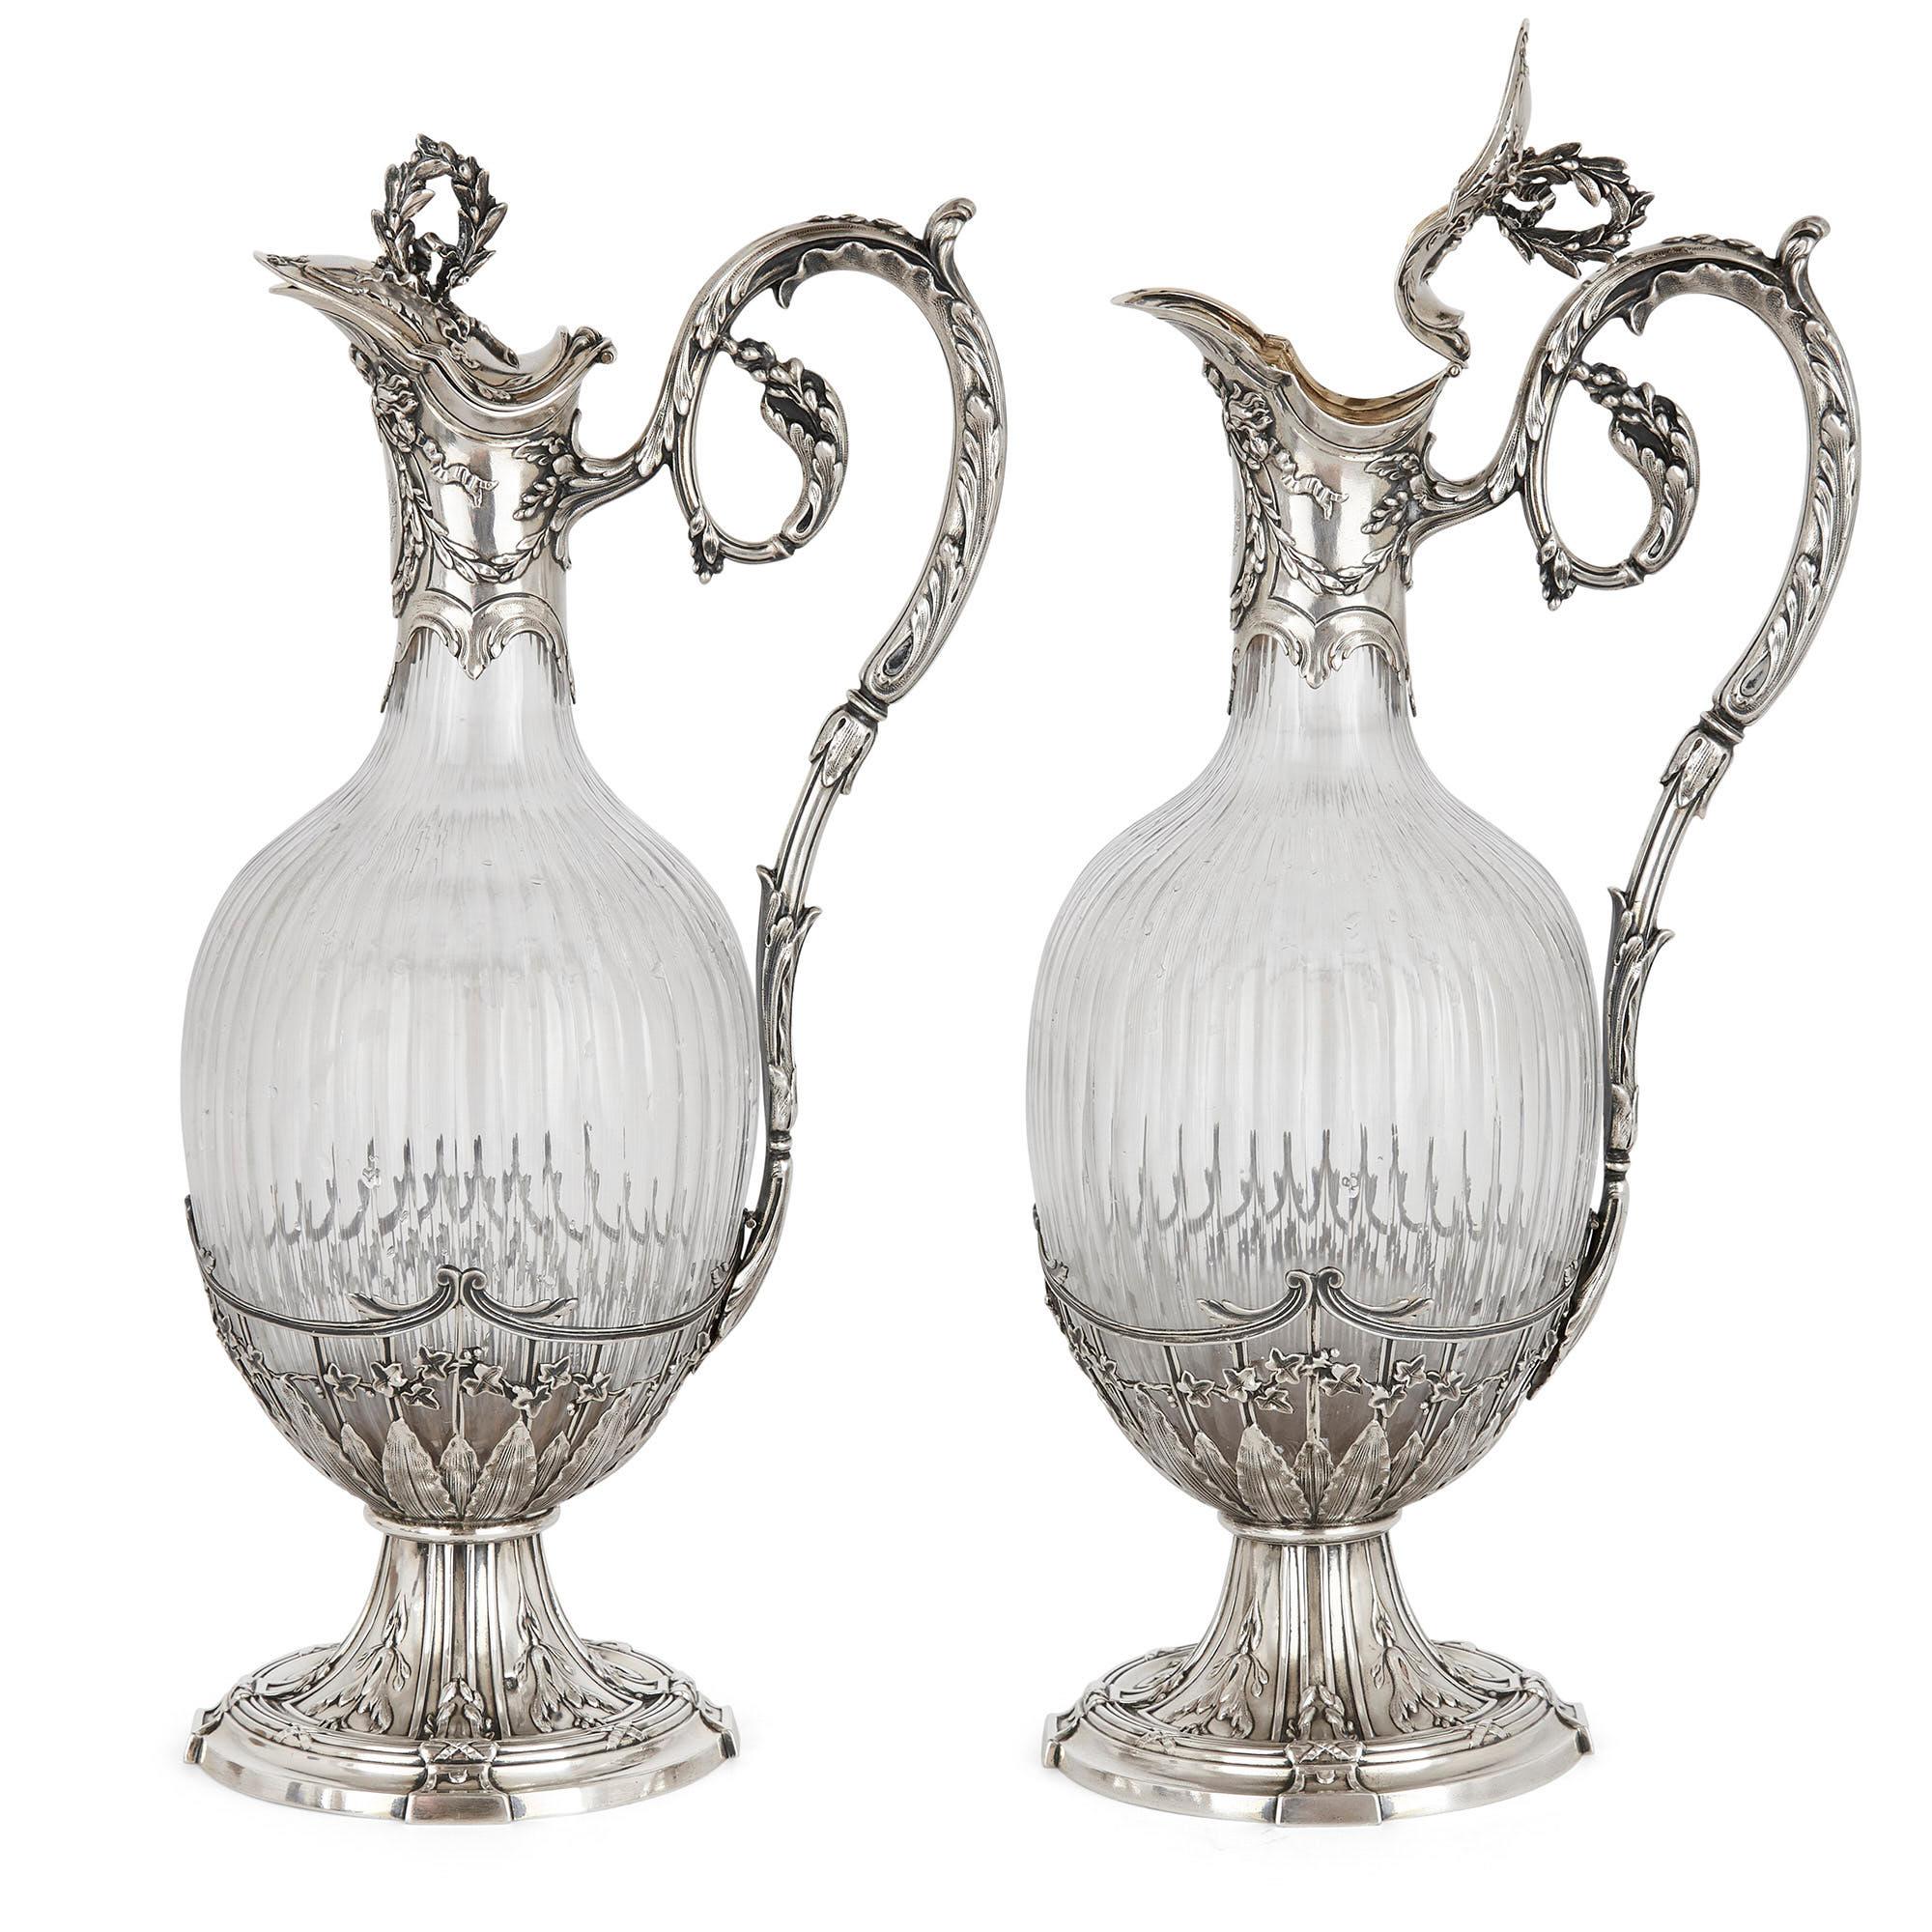 Pair of Rococo style silver mounted crystal jugs by Boivin
French, late 19th century
Measures: Height 31cm, width 15cm, depth 10cm

This beautiful pair of jugs is by Victor Boivin, a leading silversmith working in France in the late 19th